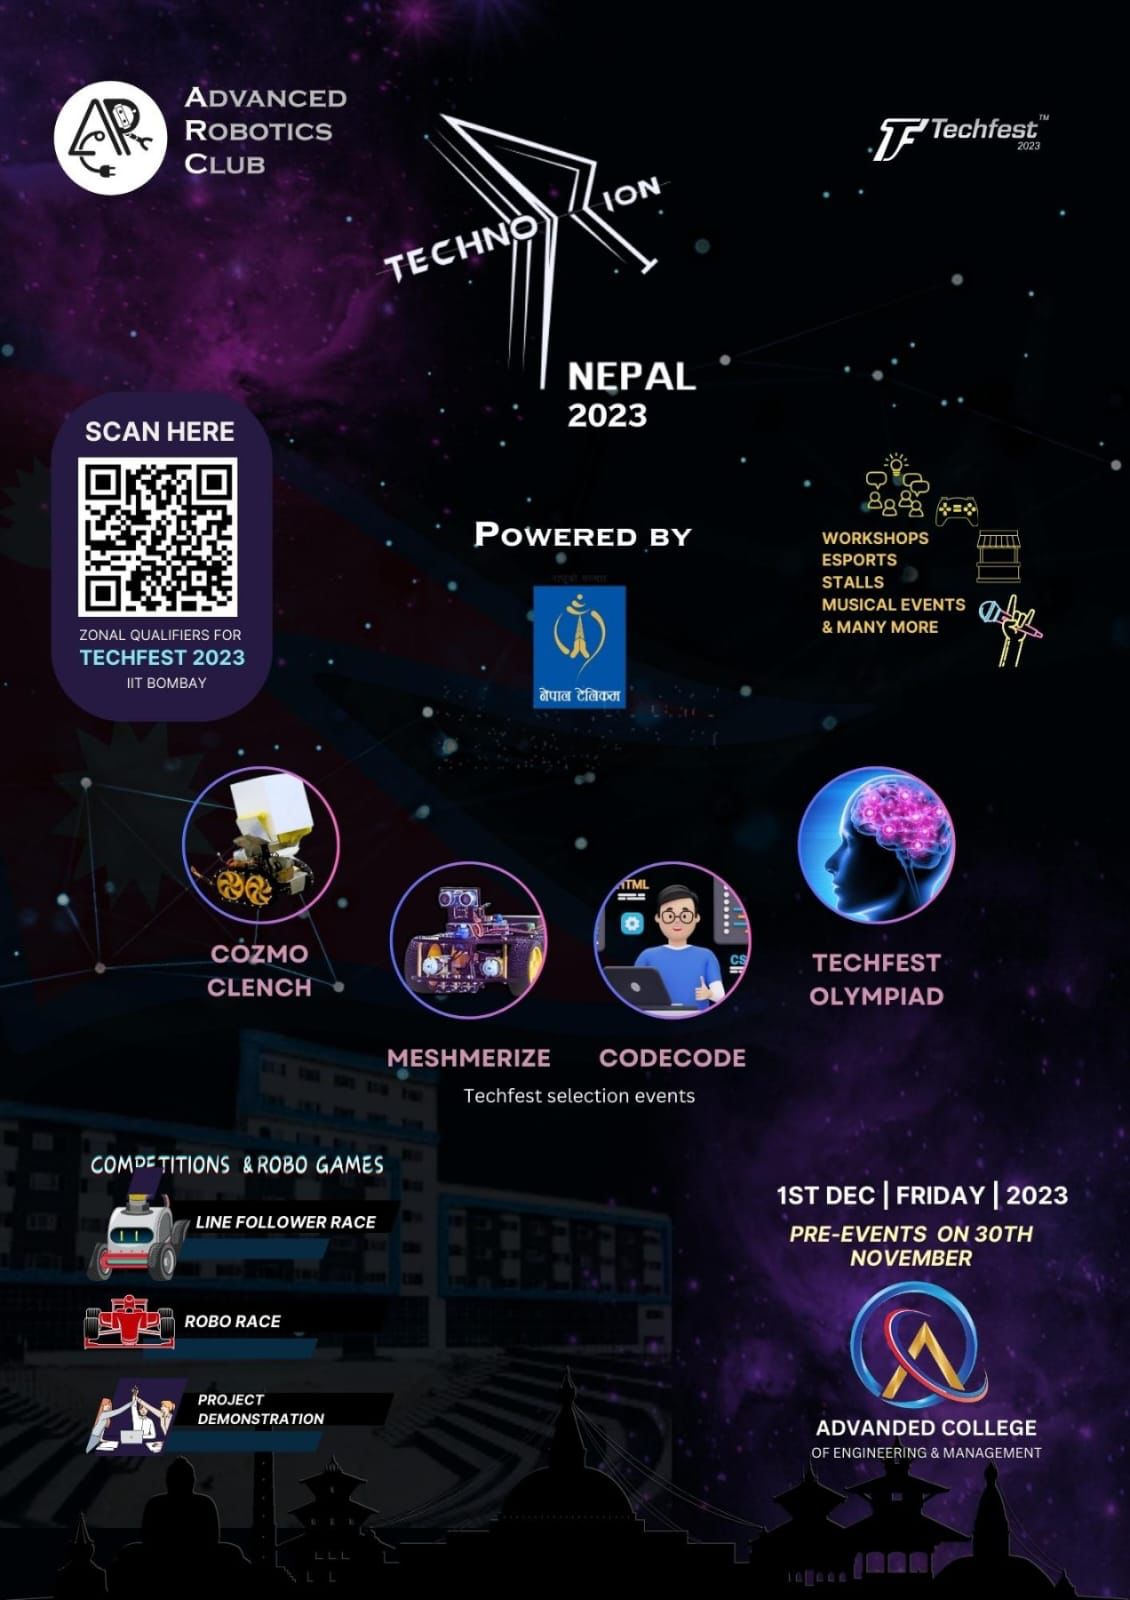 Technorion Nepal 2023 being organized in collaboration with ARC